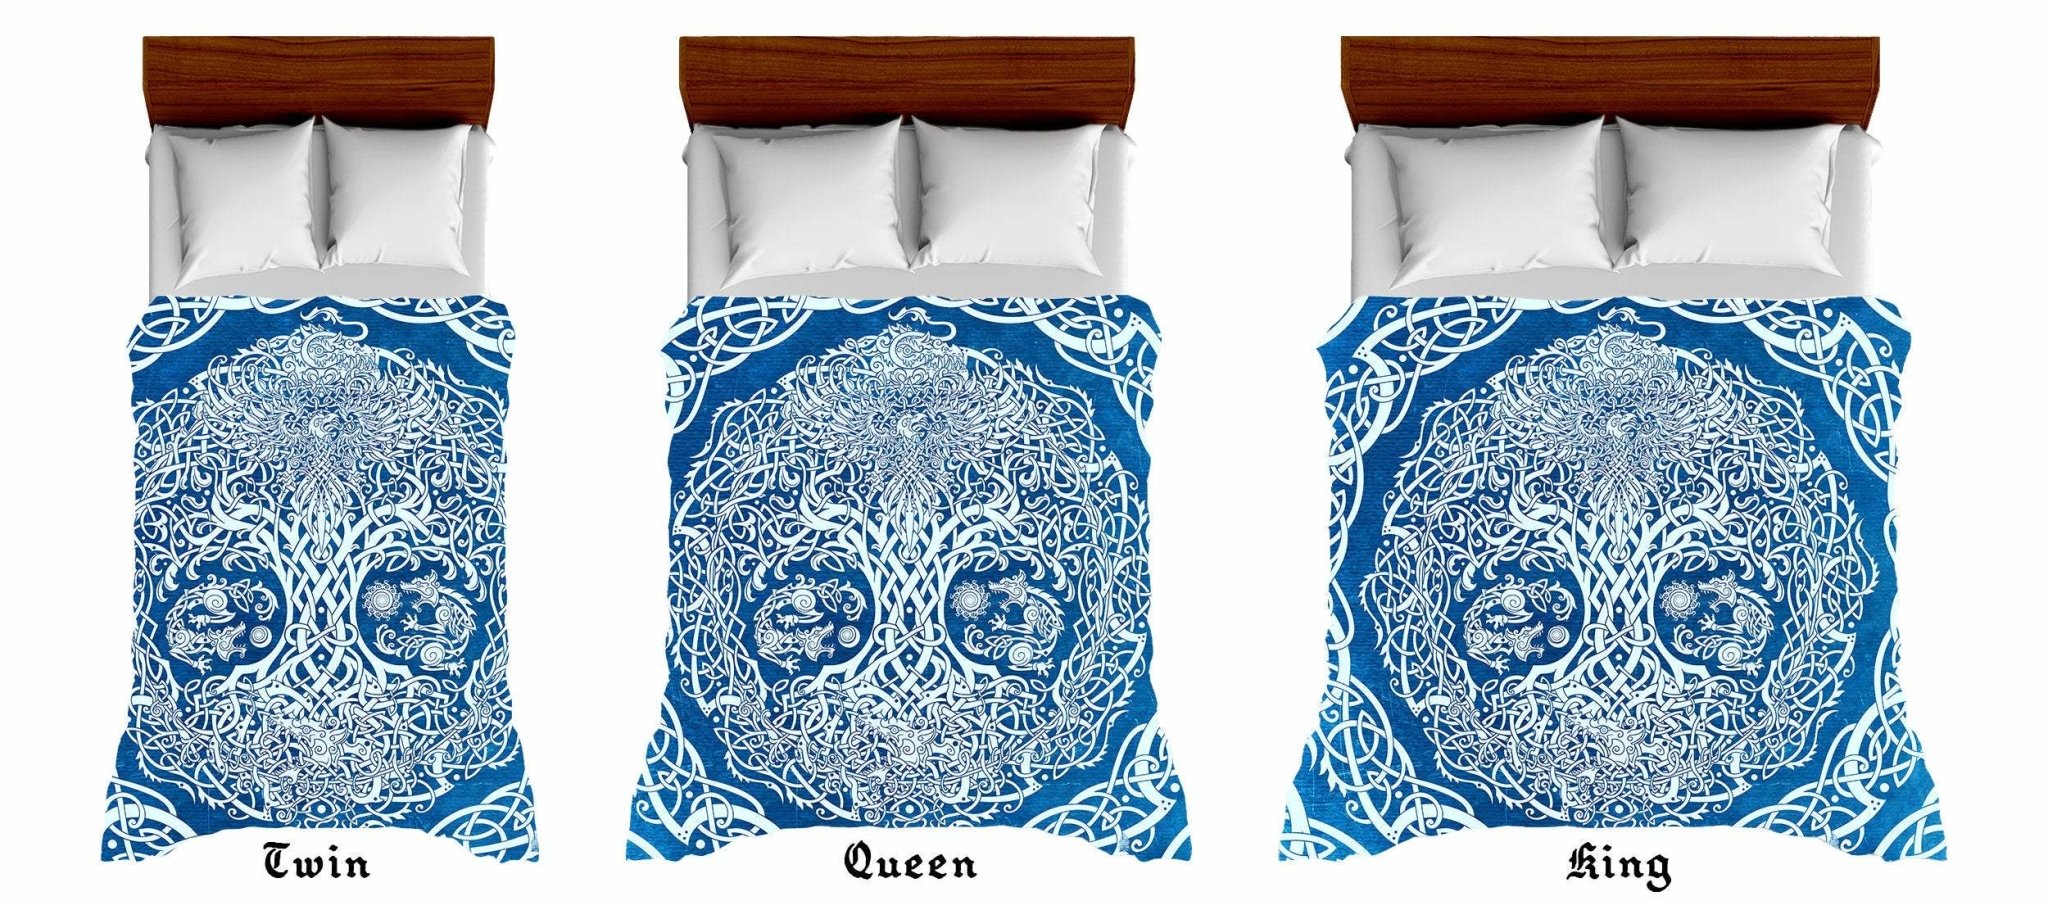 Viking Bedding Set, Comforter and Duvet, Yggdrasil Bed Cover and Bedroom Decor, Norse Art, King, Queen and Twin Size - Blue - Abysm Internal